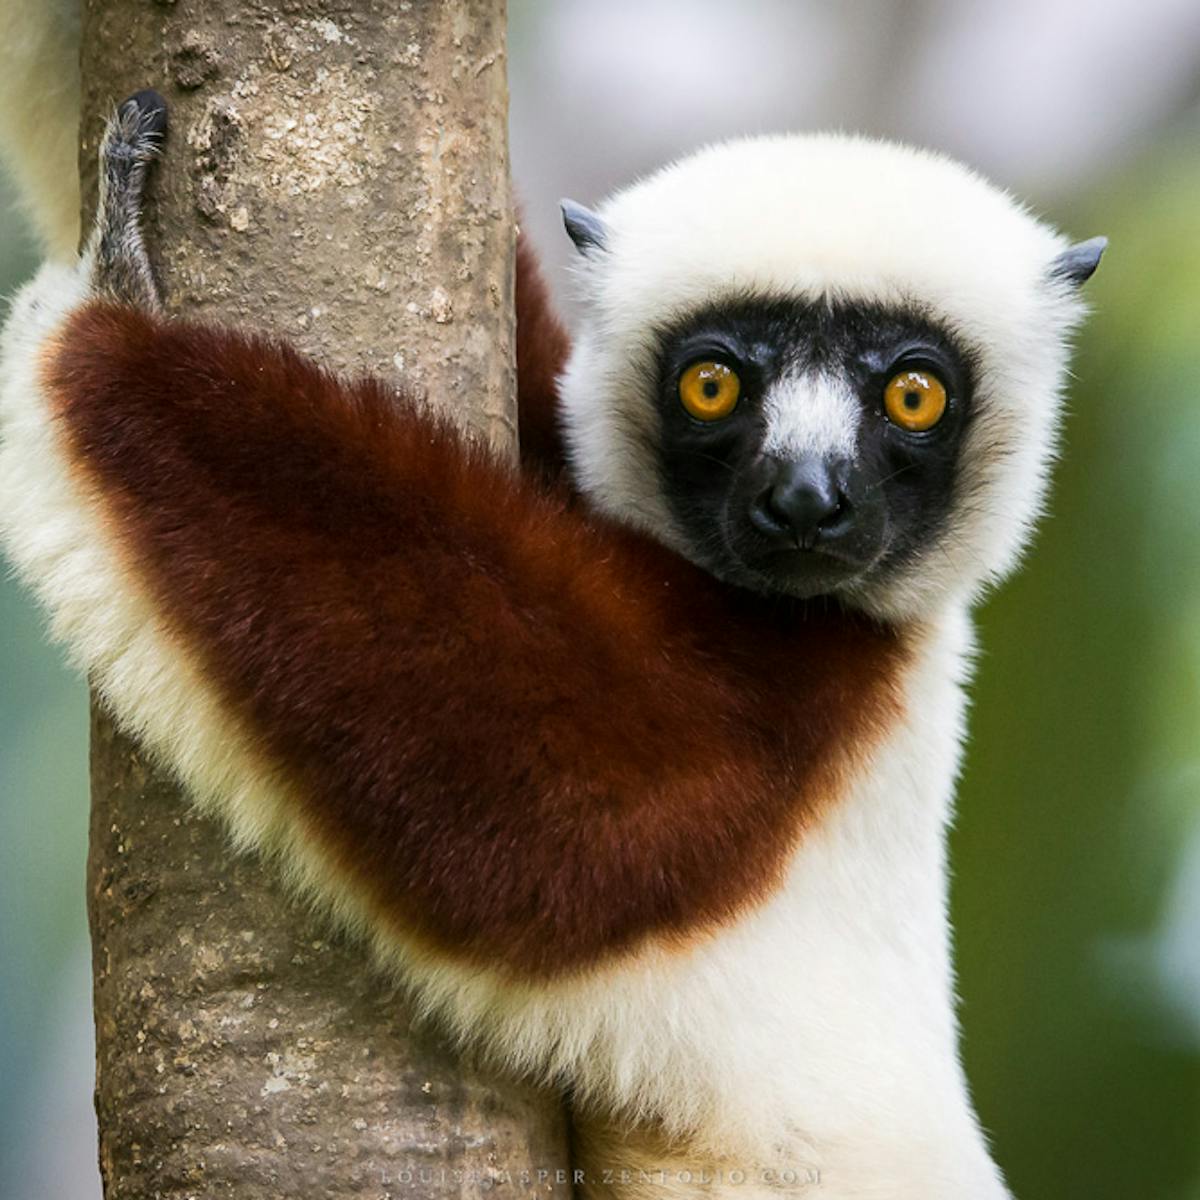 Madagascar's 'swamp lemurs' have been documented for the first time